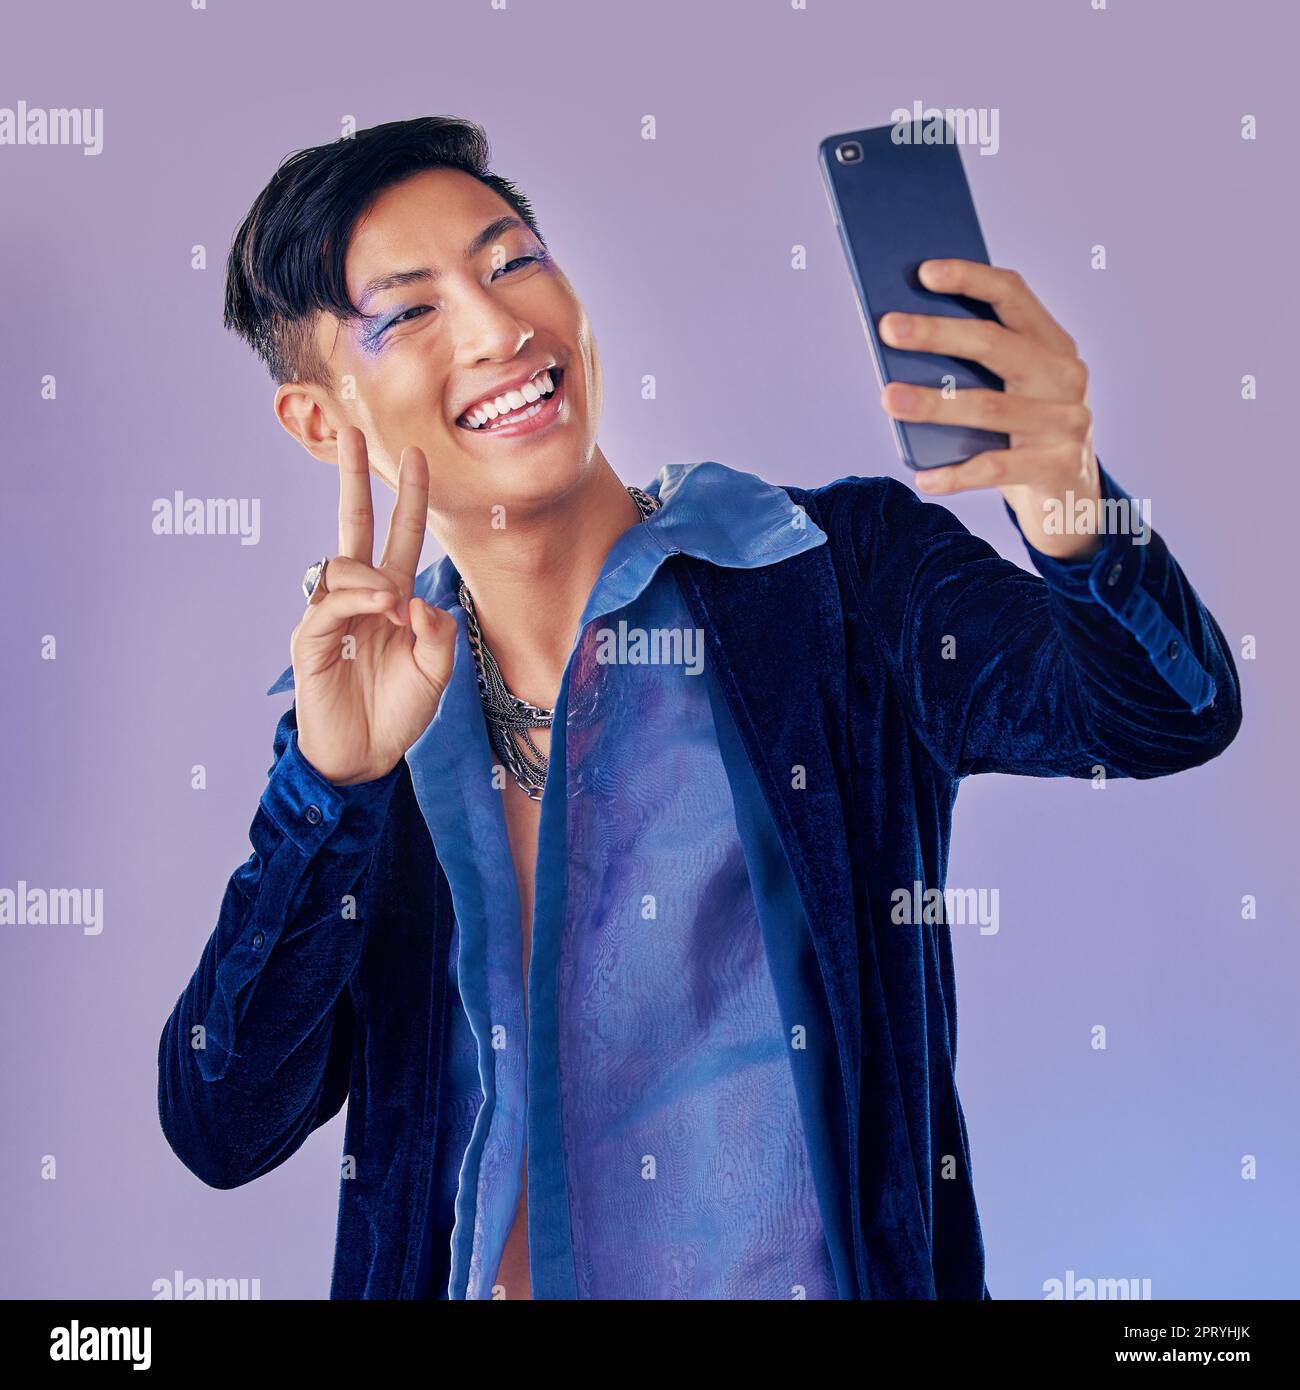 Man, makeup art and selfie with phone for creative, skin or beauty with happiness against purple backdrop. Happy, model and photo with smartphone with Stock Photo